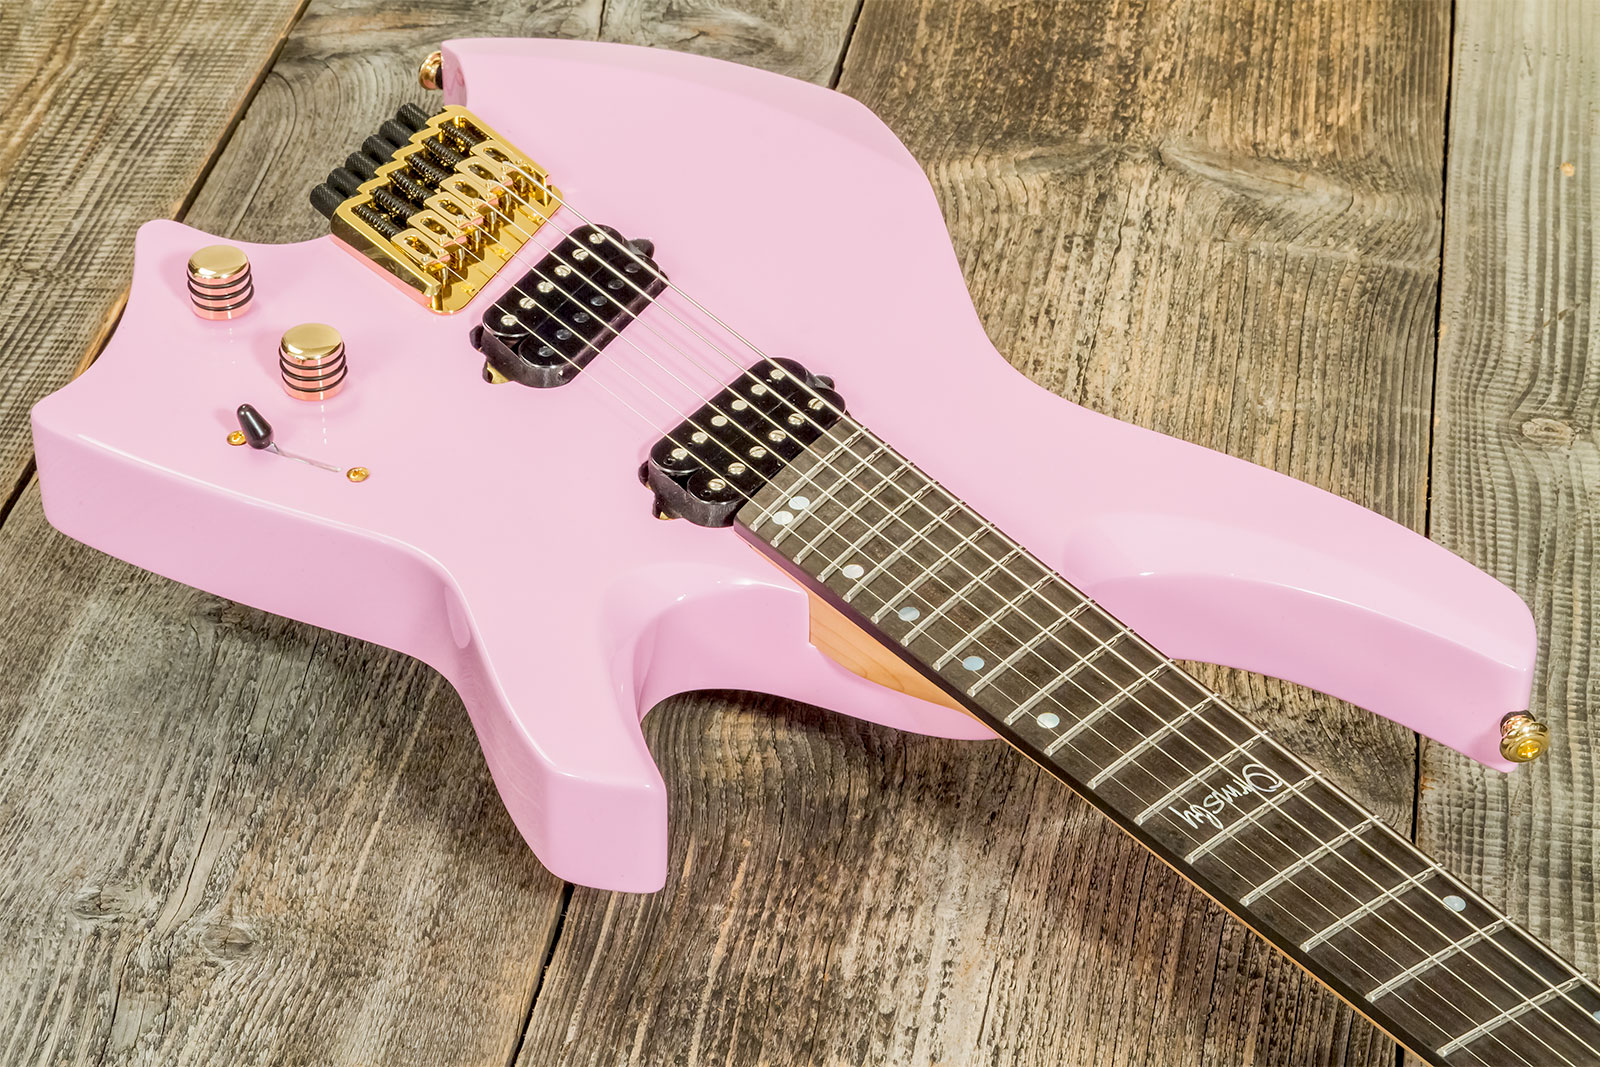 Ormsby Goliath Headless Gtr Run 14c Multiscale 2h Ht Eb - Shell Pink - Multi-Scale Guitar - Variation 1